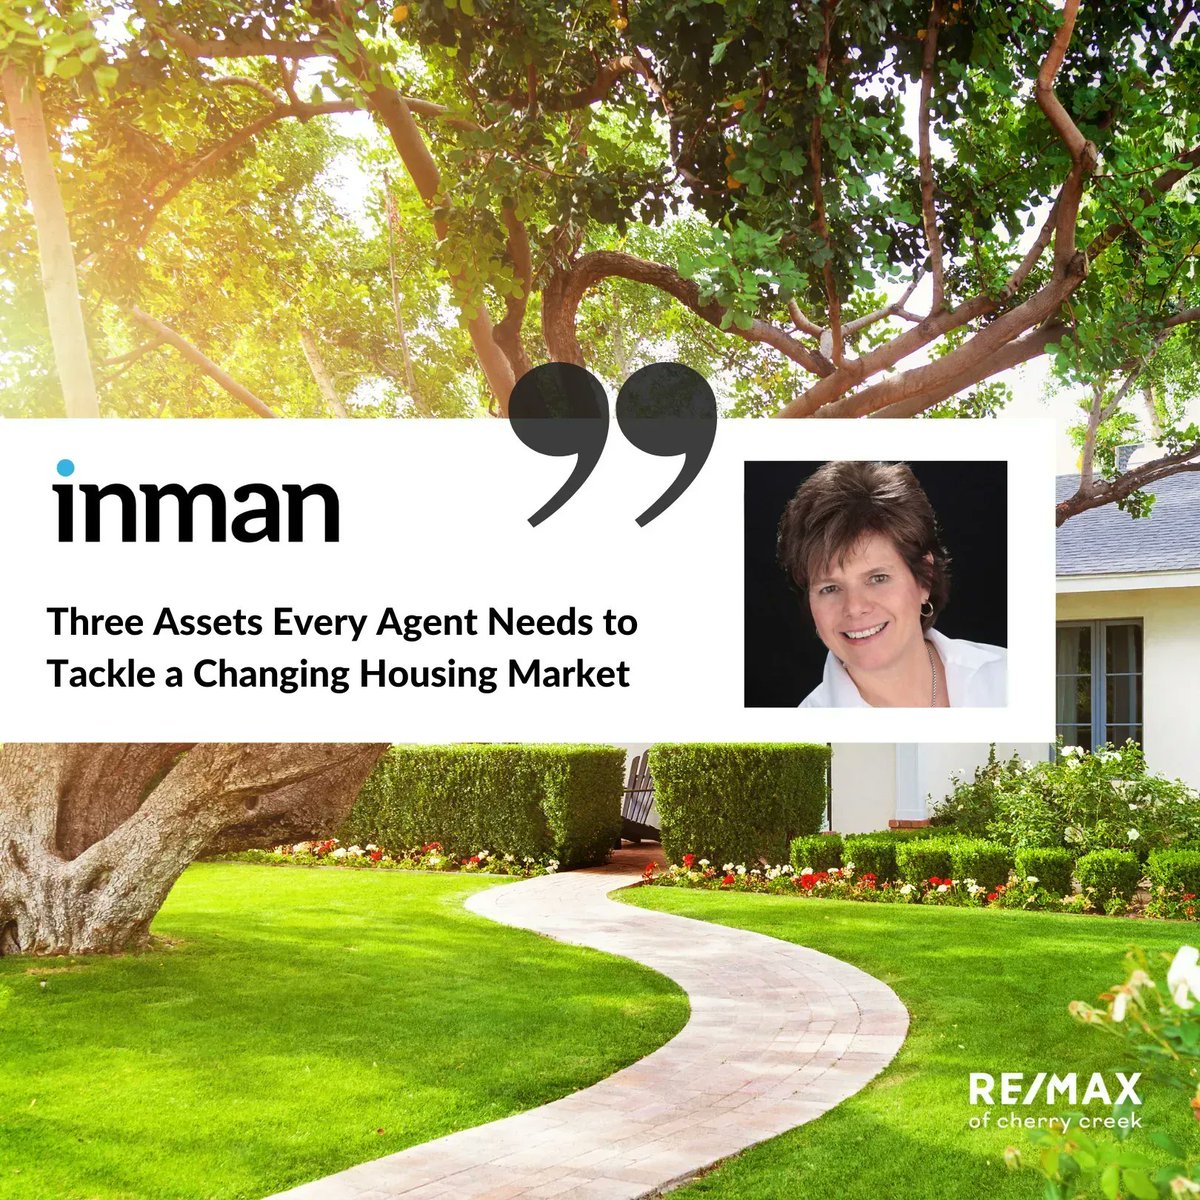 🗞️ Hot off the press! Ann Meadows, one of our incredible RMCC brokers, was featured in this Inman article sharing what every broker needs when navigating the current shifting market. Read the full article👇
inman.com/2022/09/26/3-a… #remax #annsellsdenver #remaxhustle